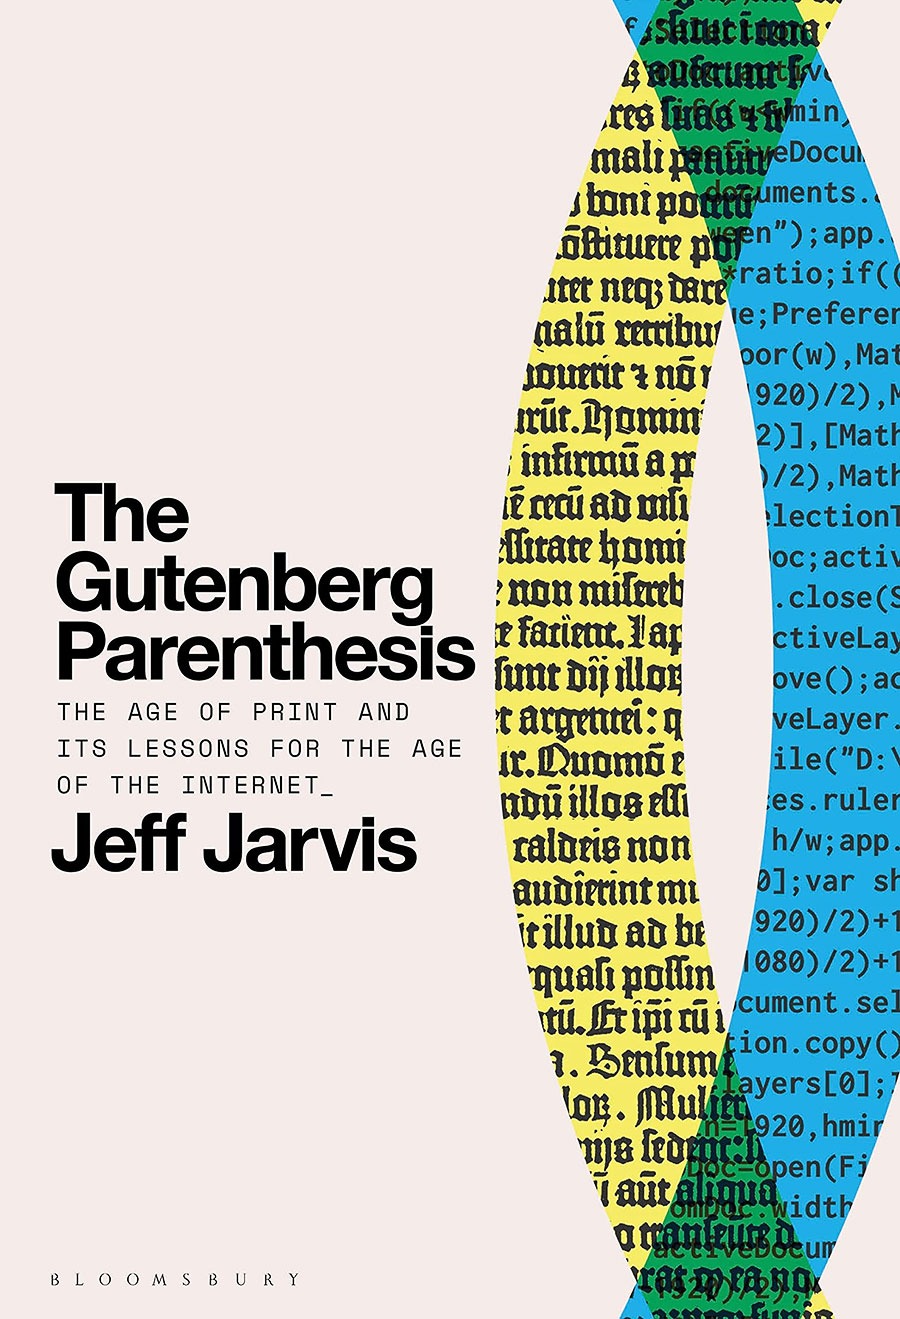 ‘The Gutenberg Parenthesis’ by Jeff Jarvis